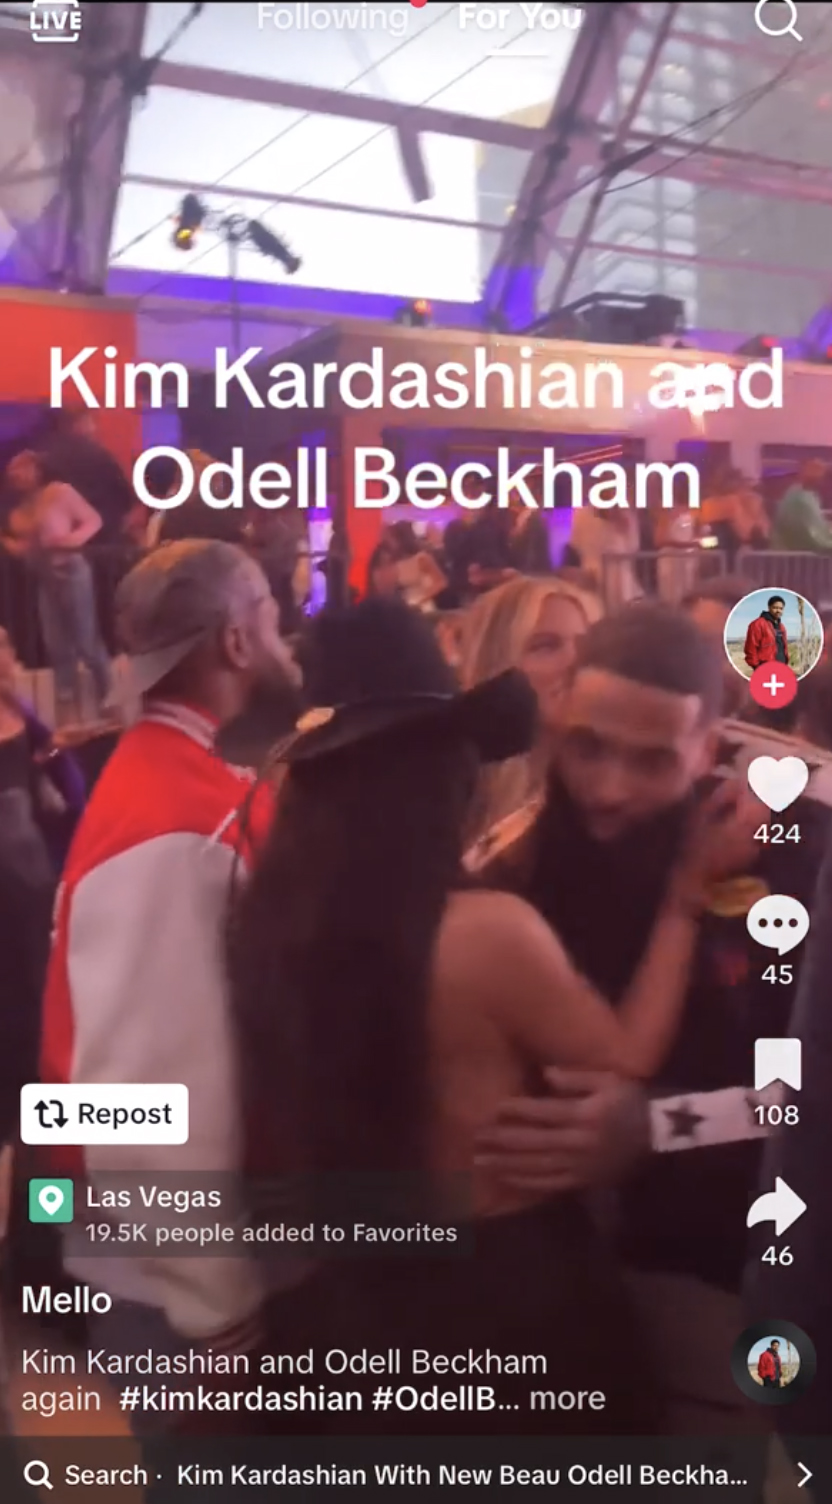 In the snippet, Kim and Odell hugged, but not in a way that conveyed that they were a couple